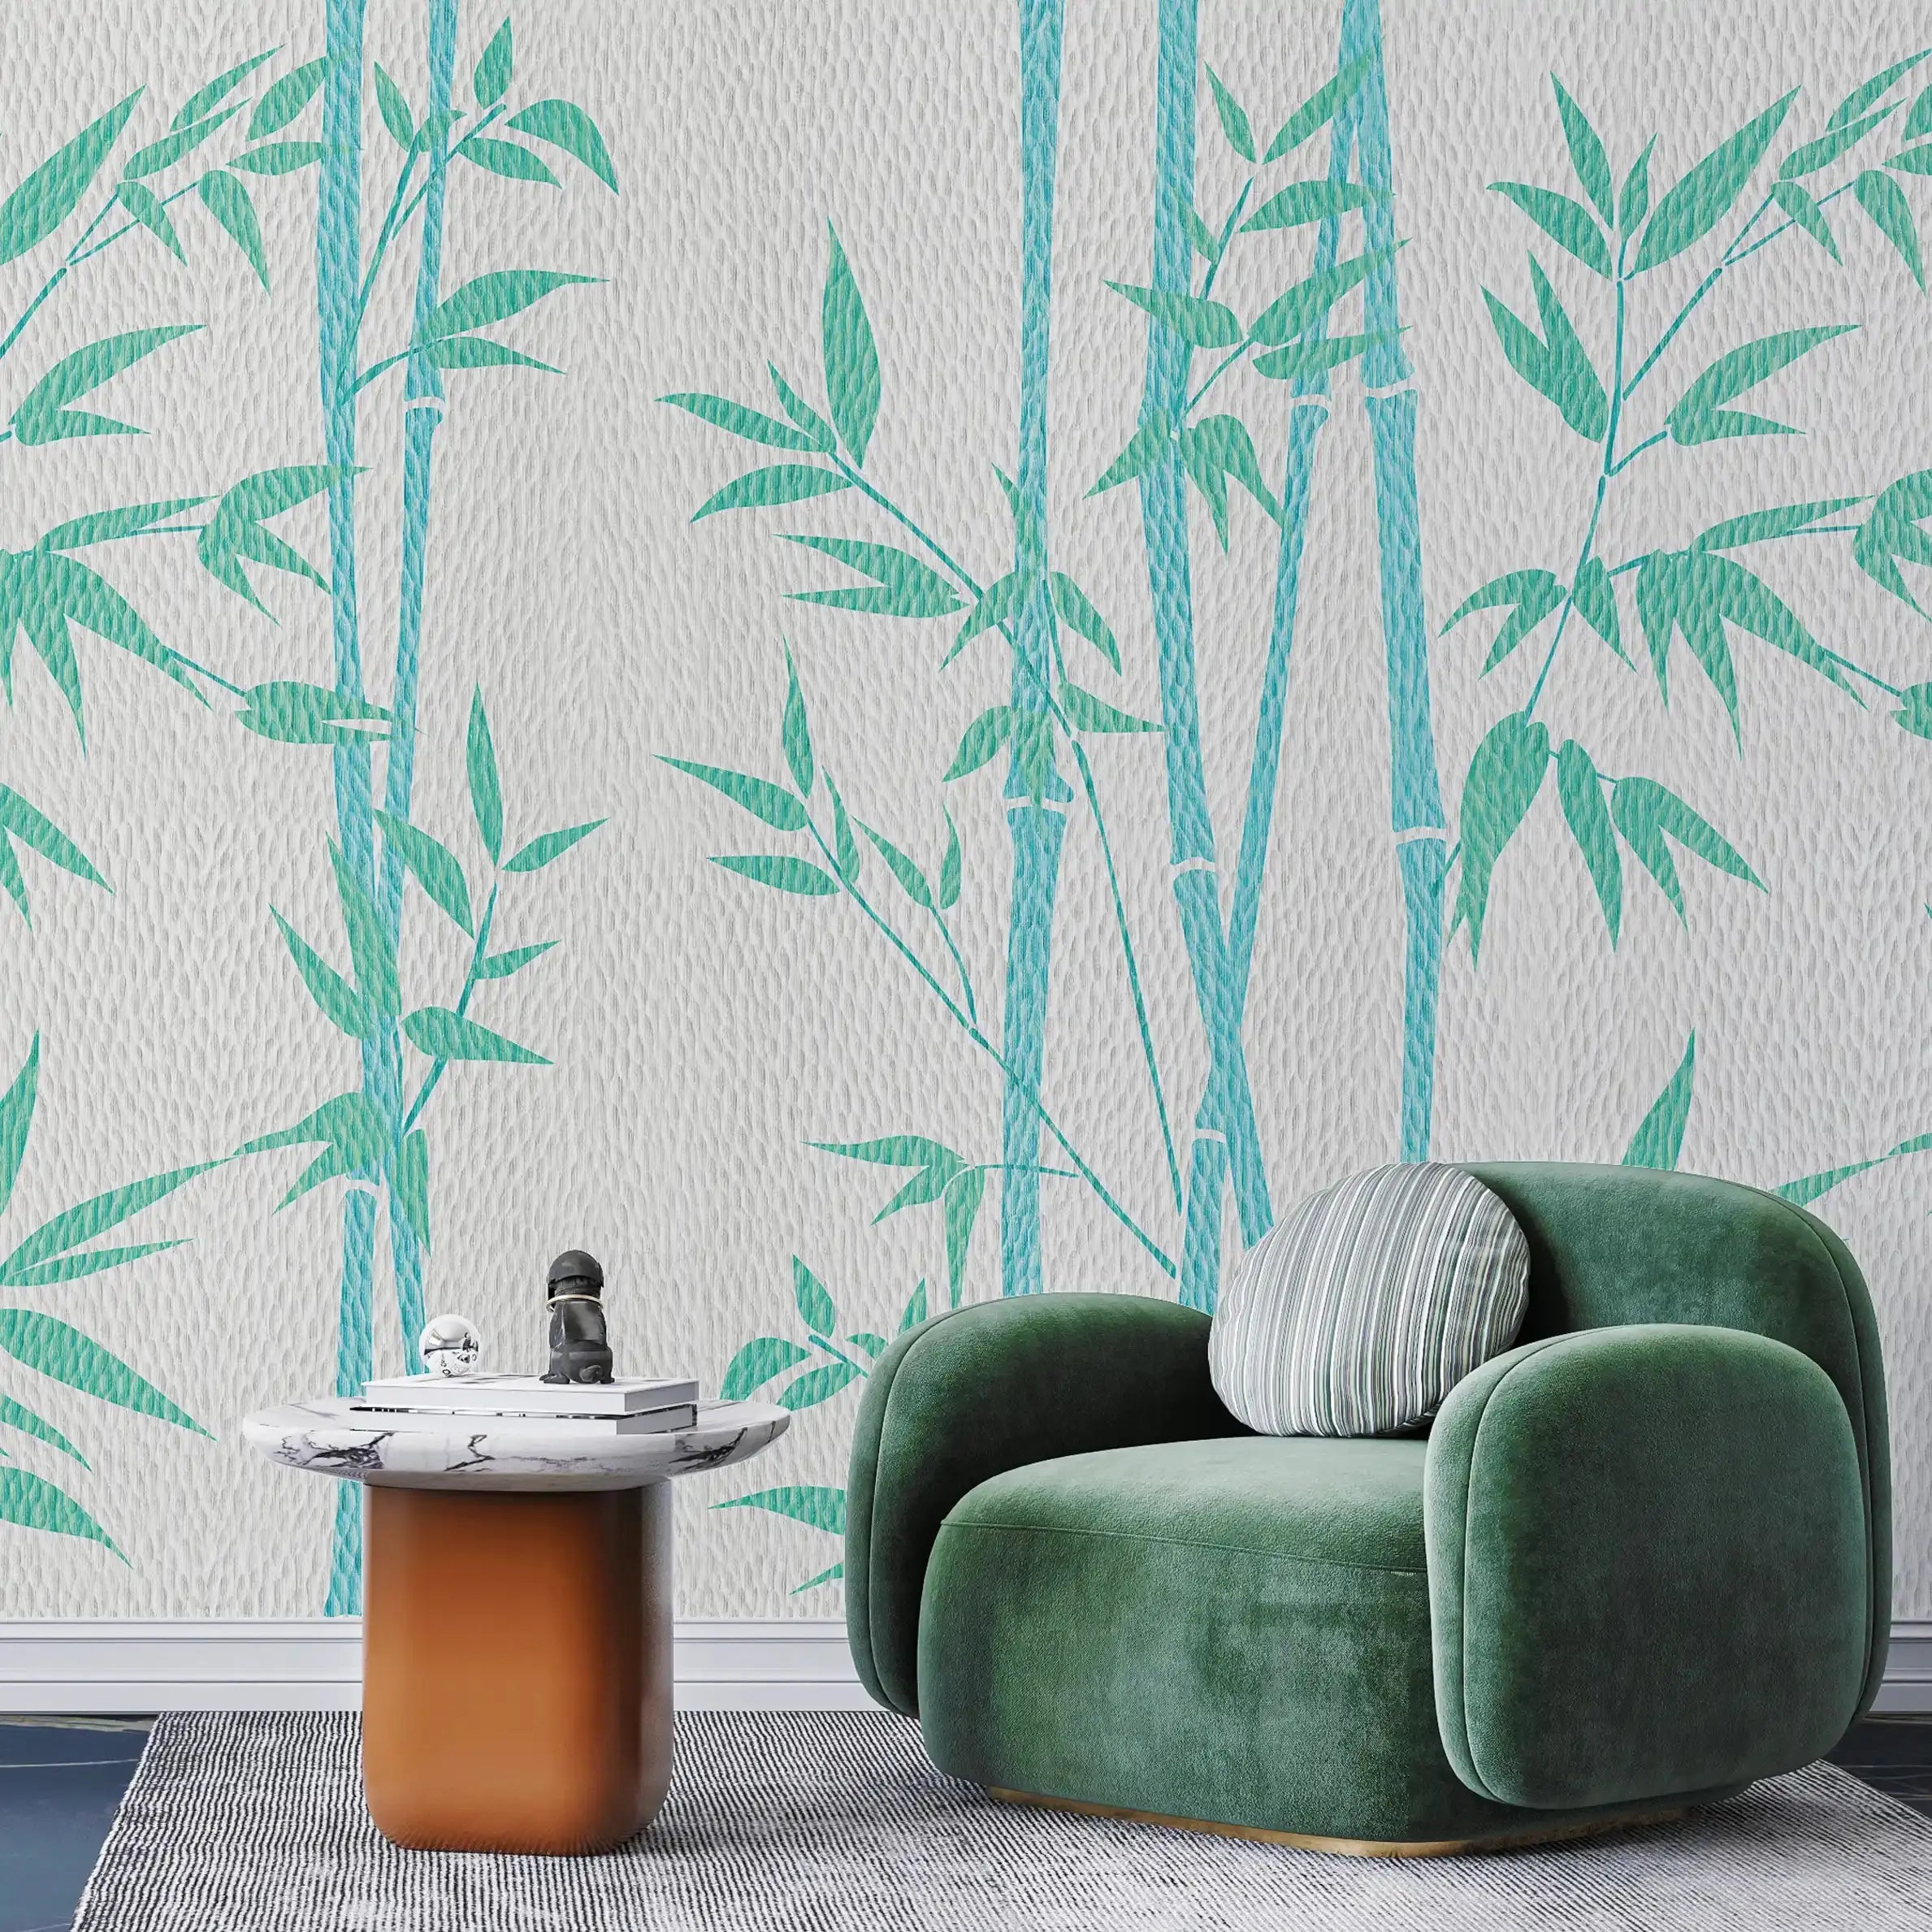 3020-A / Tropical Bamboo Leaf Wallpaper, Peel and Stick, Easy Install, Adhesive Boho Decor for Kitchen, Bathroom - Artevella